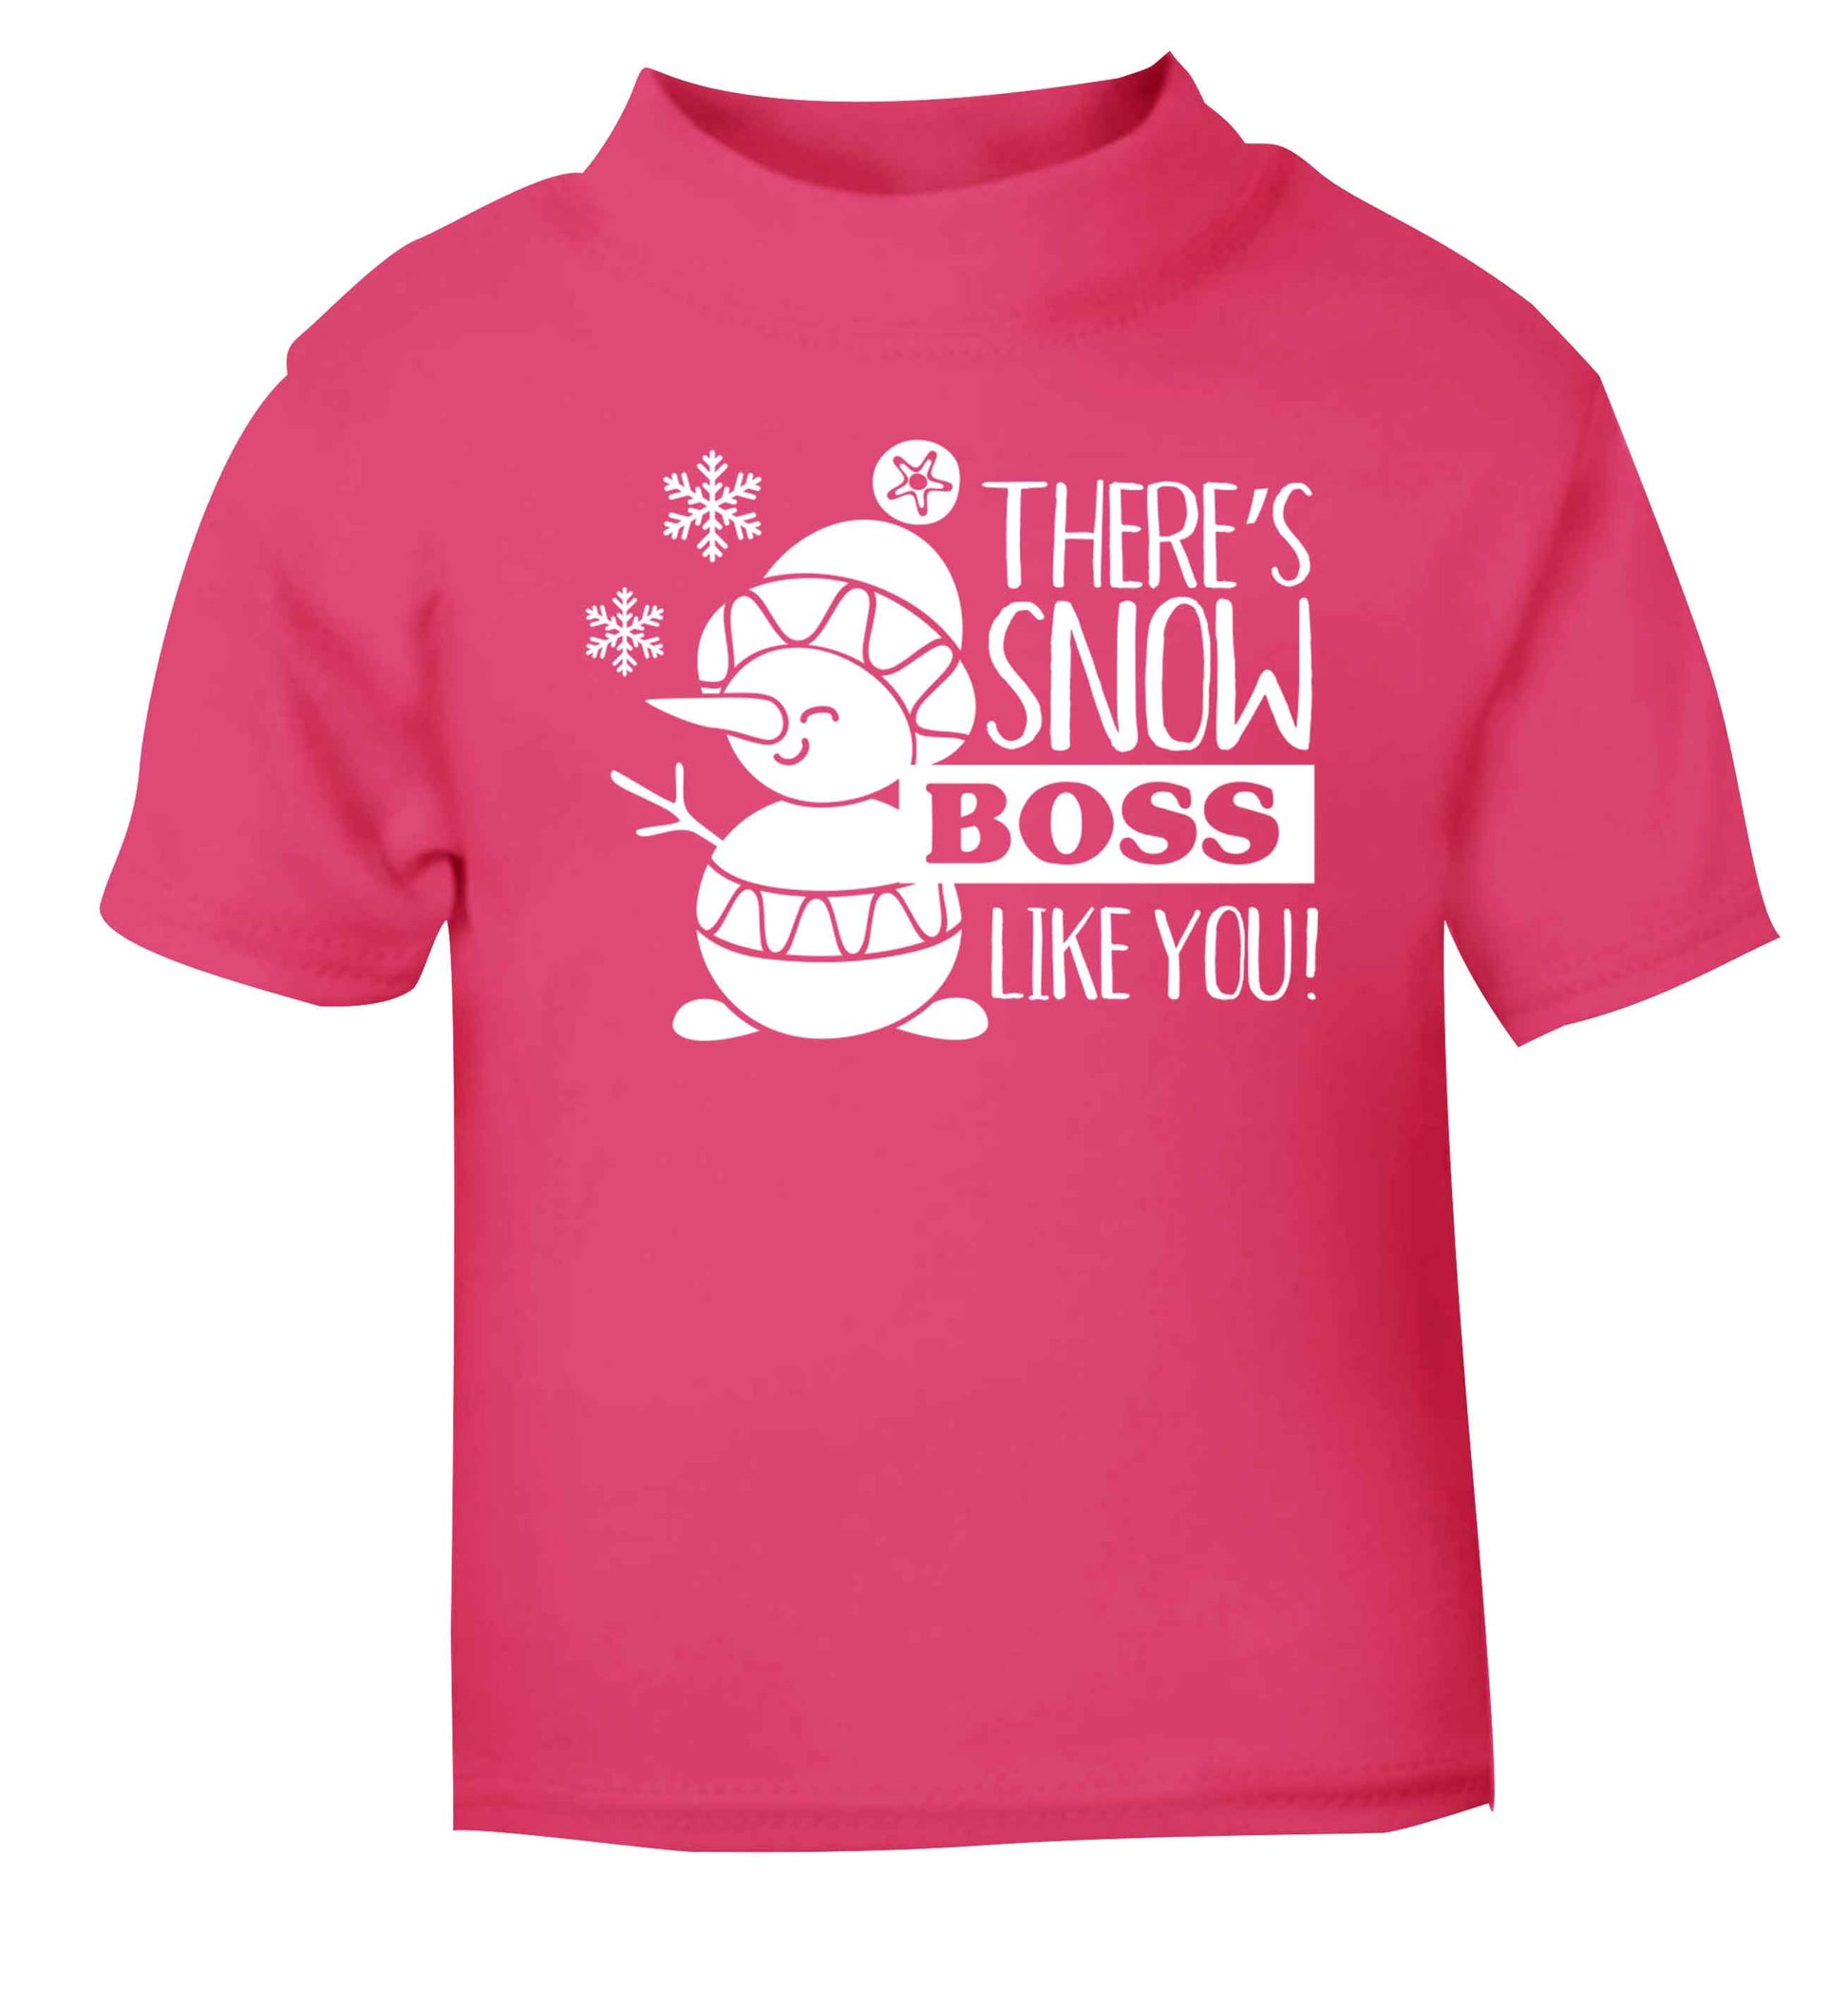 There's snow boss like you pink baby toddler Tshirt 2 Years